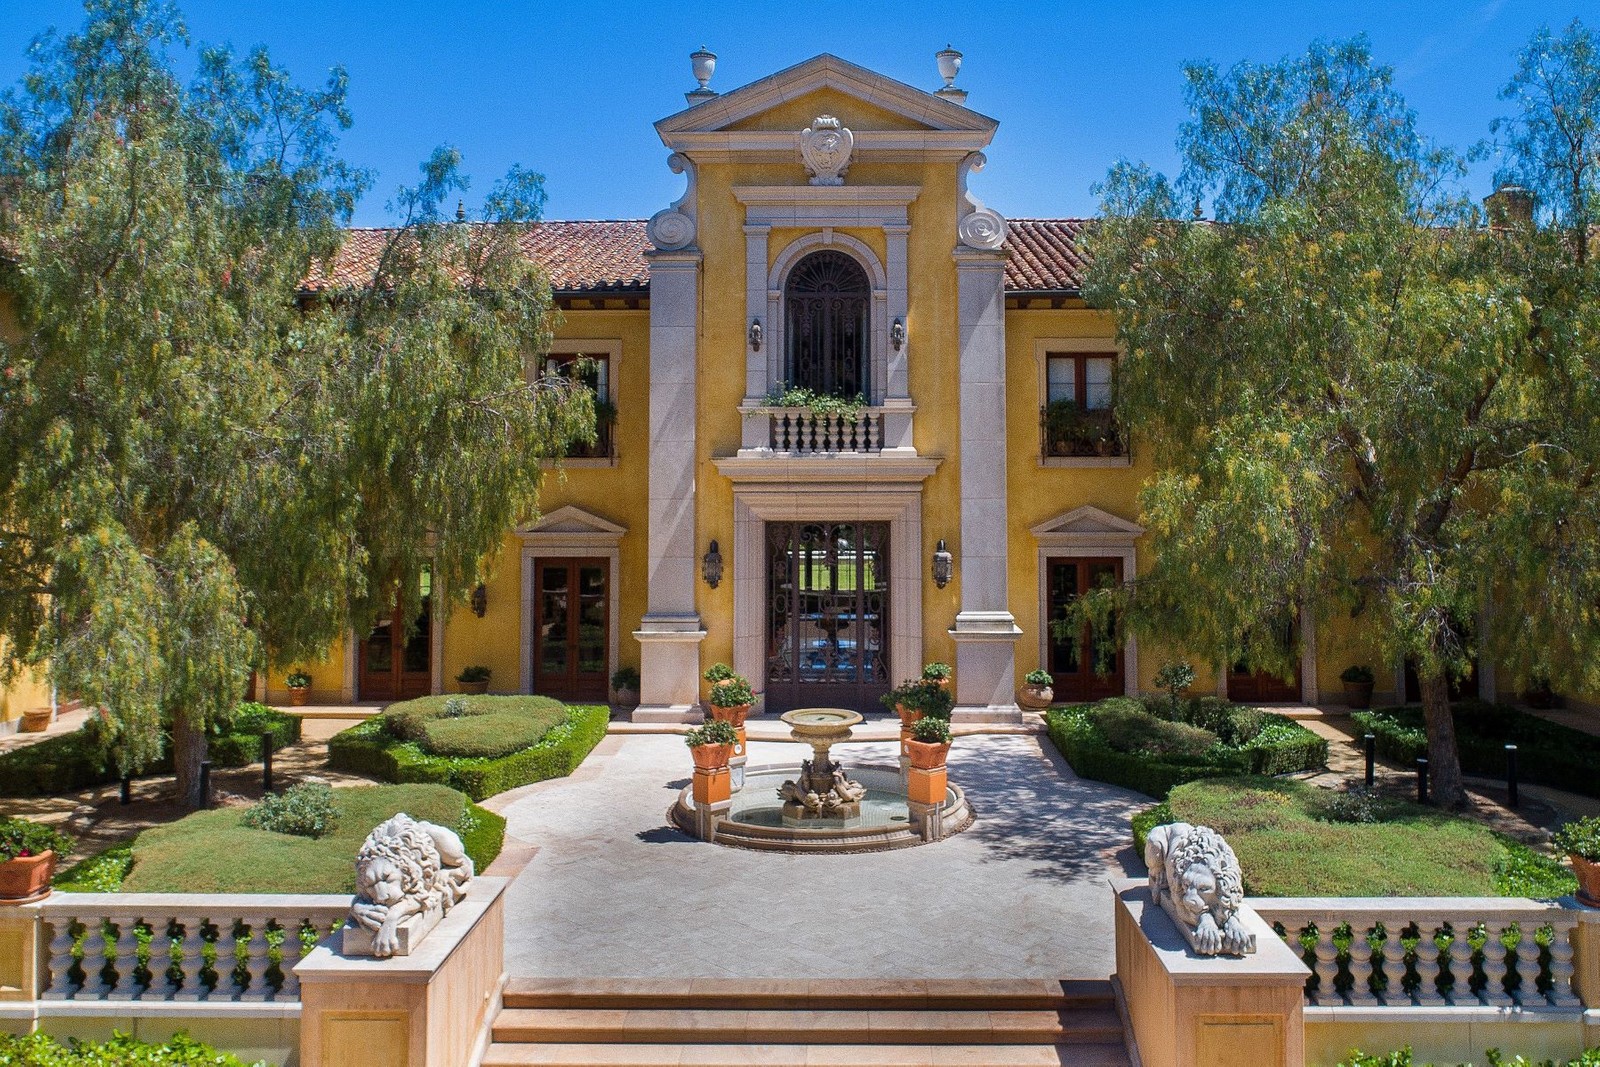 31,000 Sq. Ft. Villa Firenze Sold Last Year for $51M, Hits the 